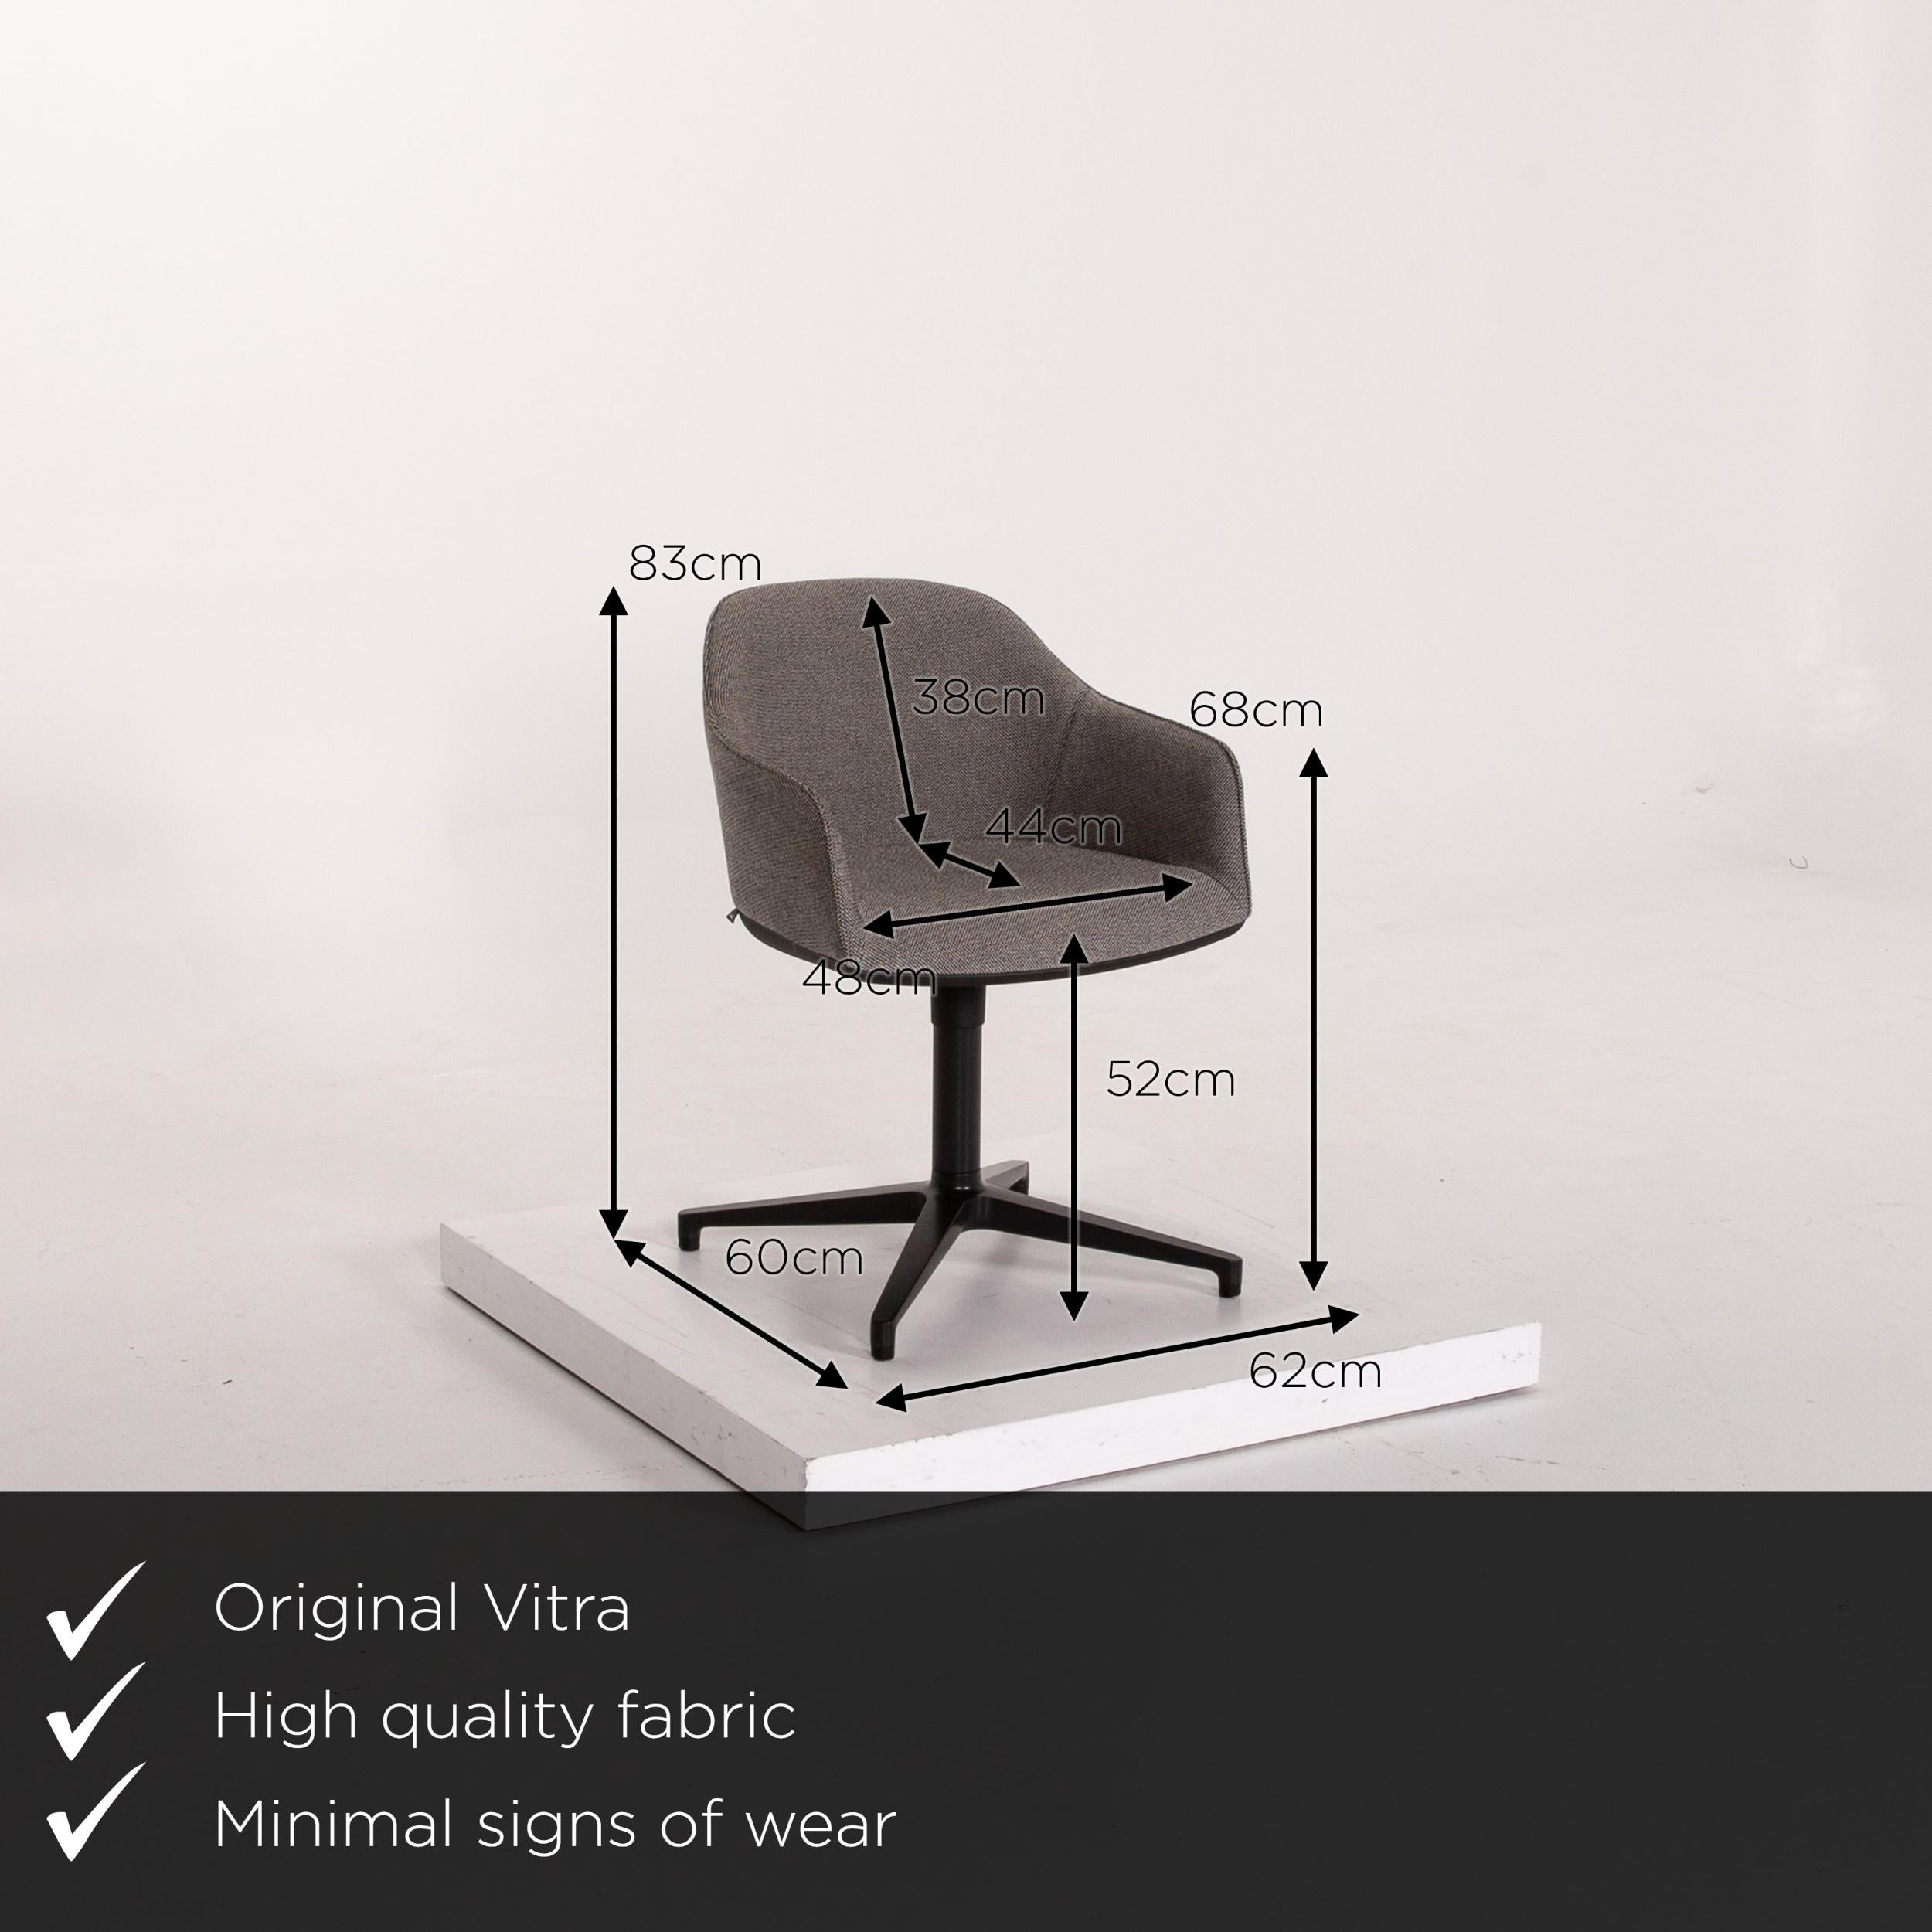 We present to you a Vitra softshell fabric armchair gray swivel chair.


 Product measurements in centimeters:
 

Depth 60
Width 62
Height 83
Seat height 52
Rest height 68
Seat depth 44
Seat width 48
Back height 38.

 